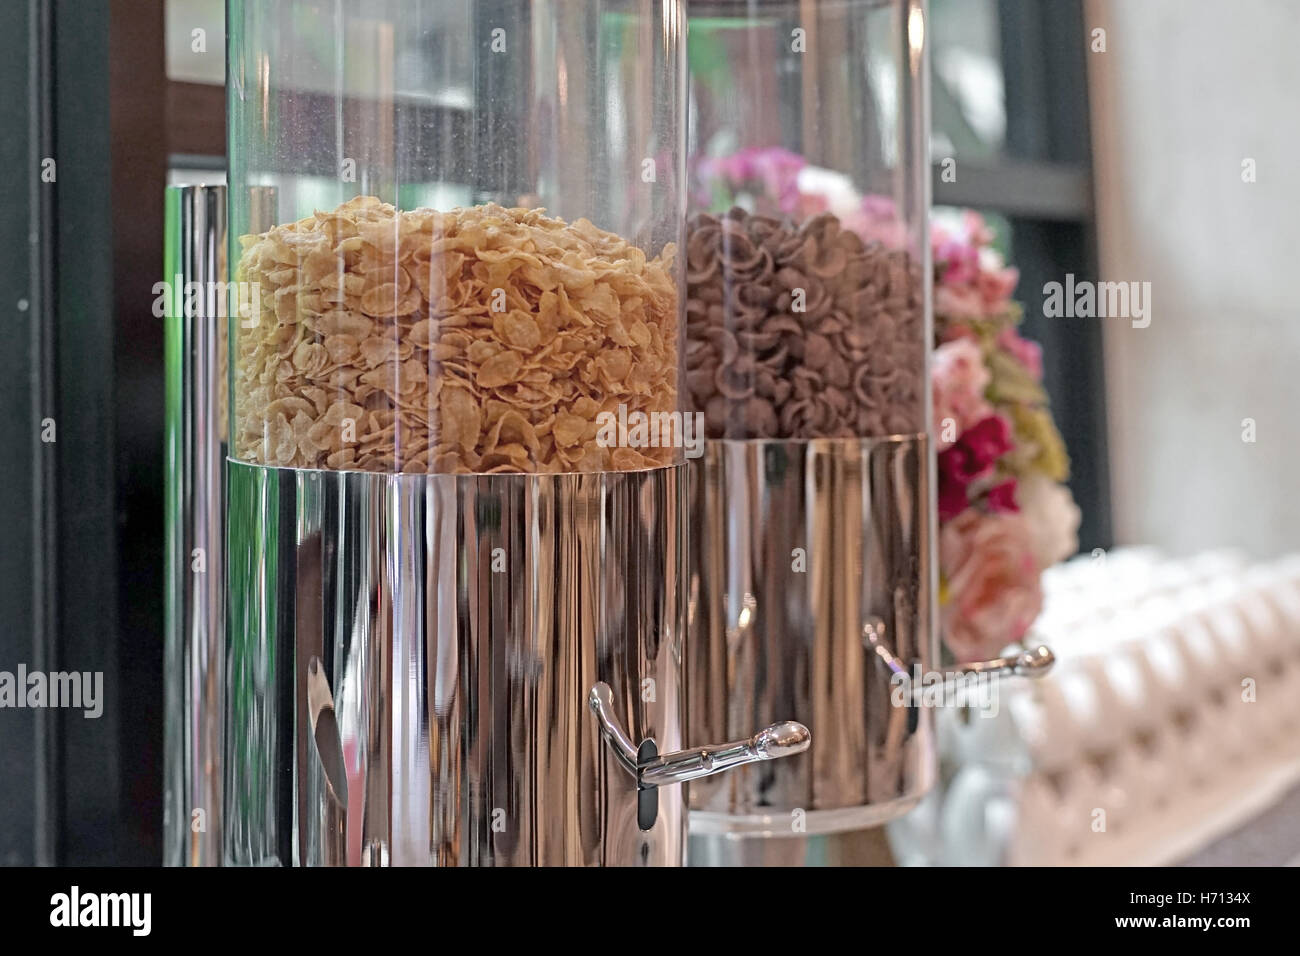 different kind of cereal cornflakes in a glass jar on buffet table Stock Photo